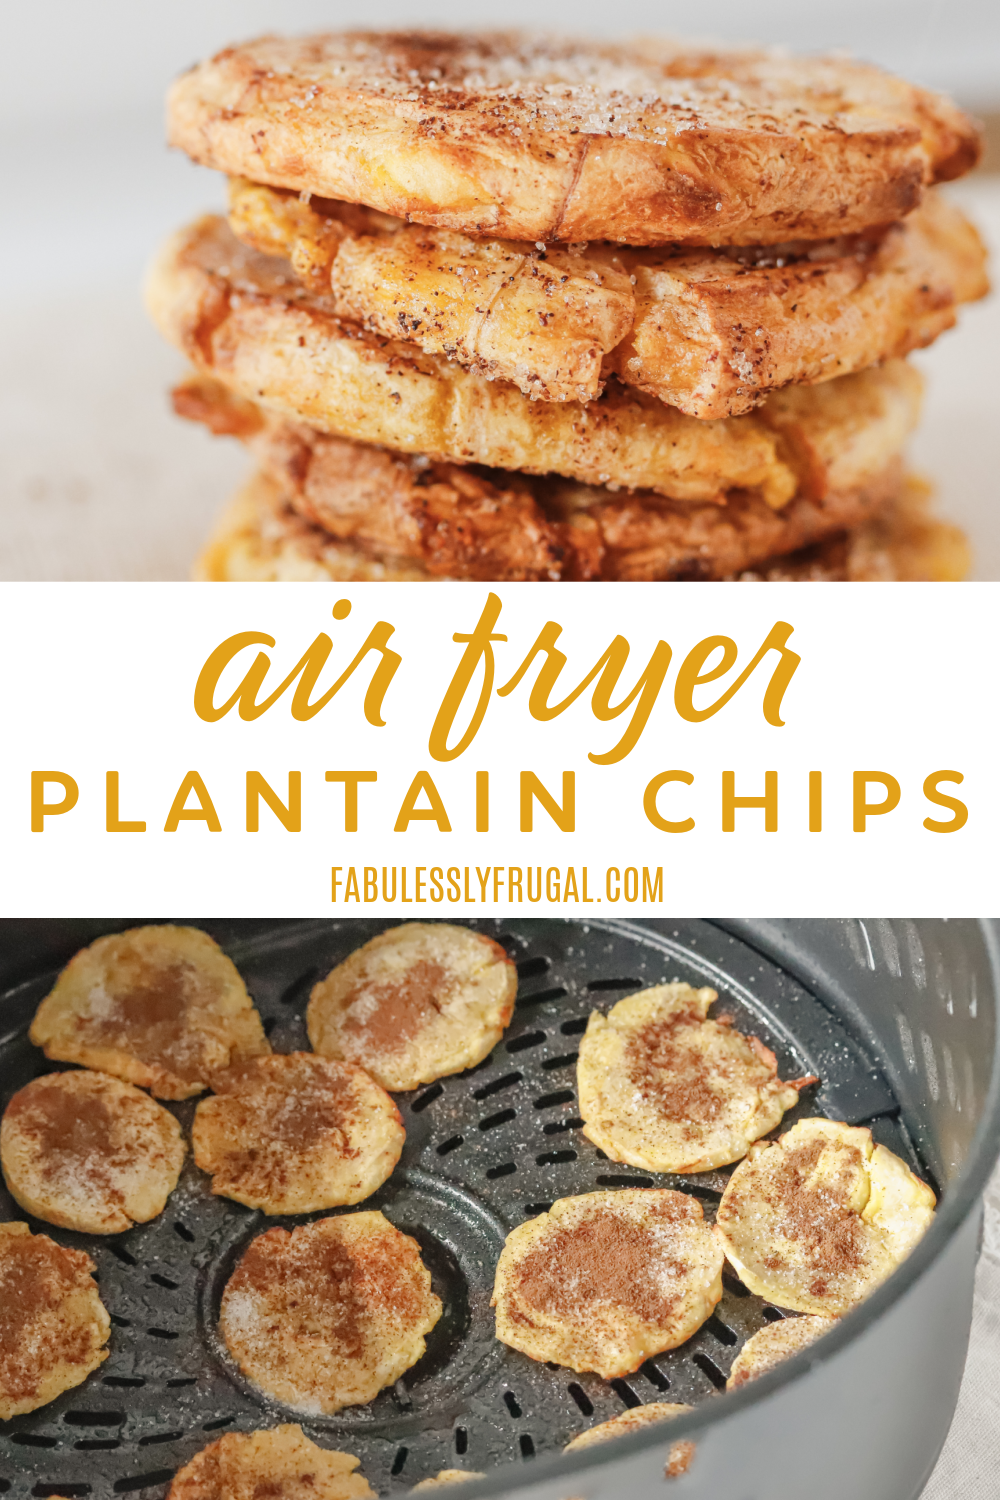 You will fall in love with this crunchy and sweet air fryer plantain chips. A quick and simple air fryer go-to recipe that is healthy and delicious!